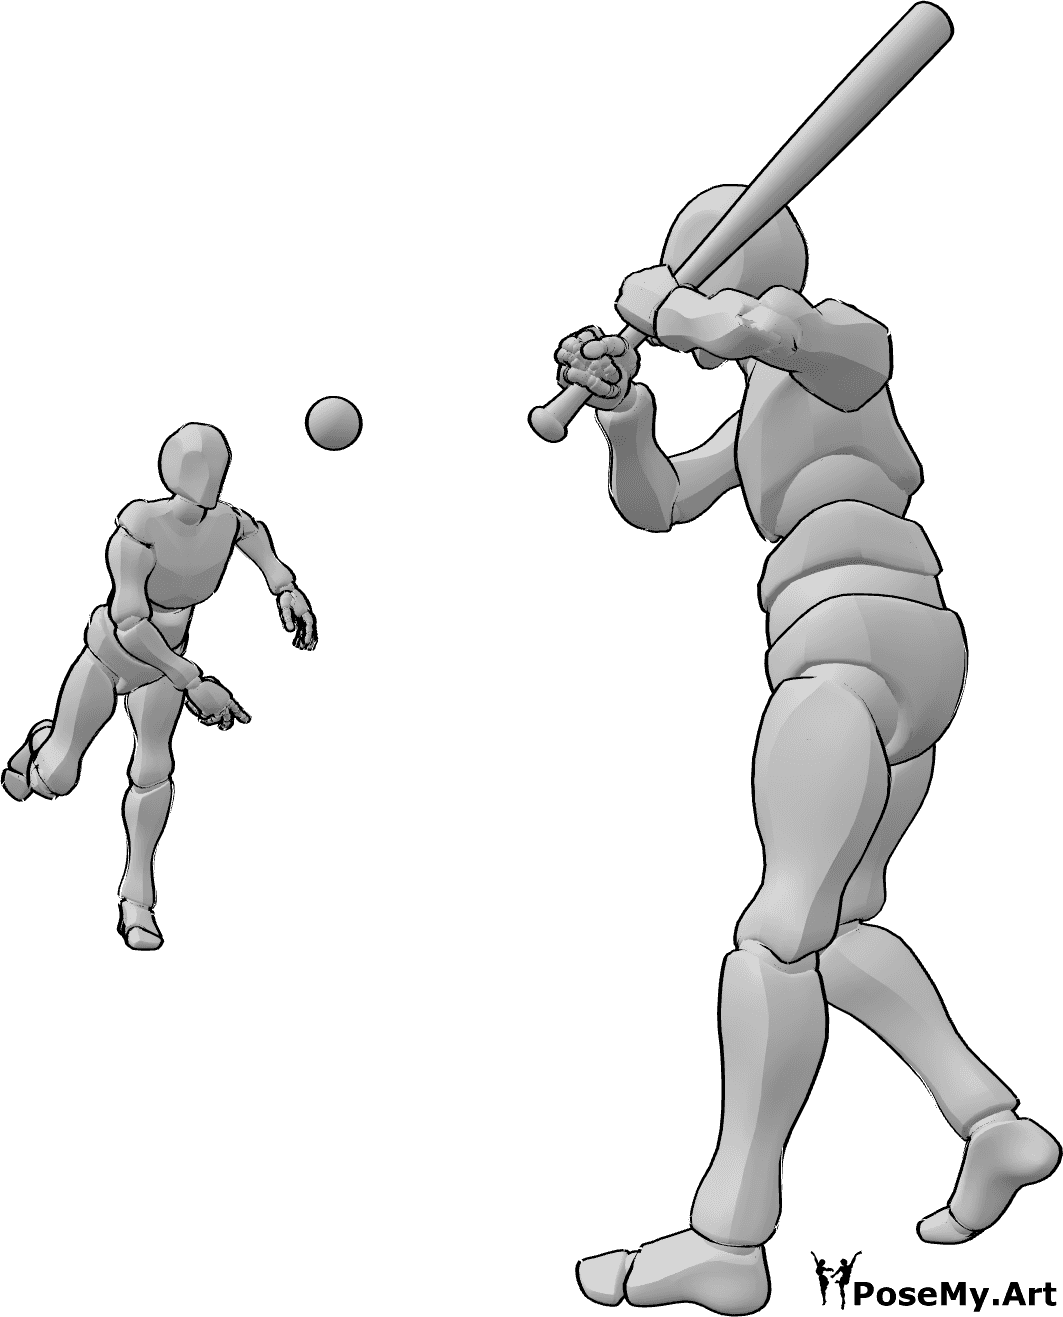 Pose Reference- Baseball exercise pose - Two male baseball players are exercising to throw and hit the ball